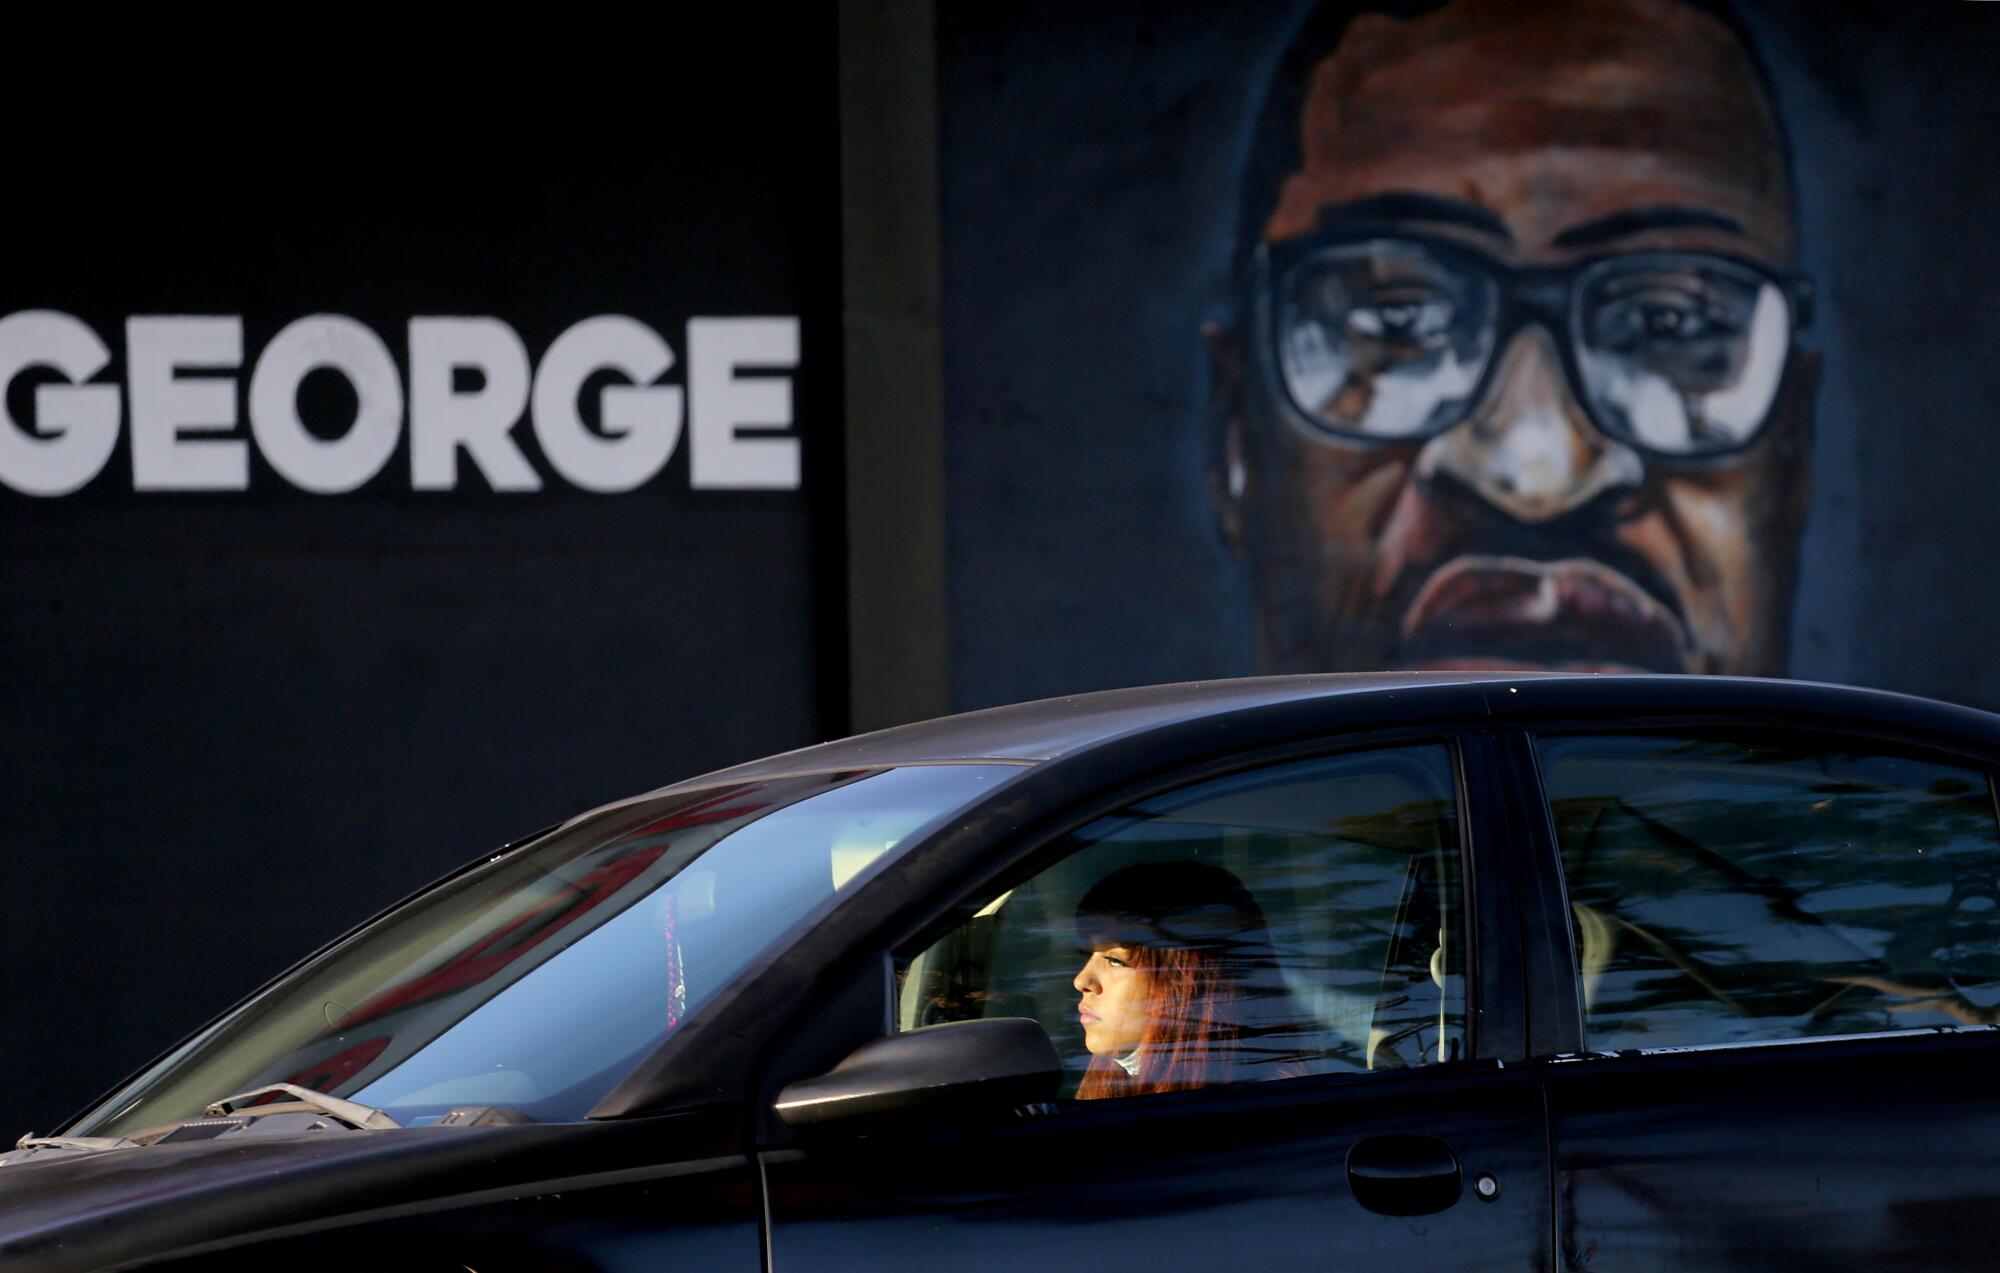 A likeness of George Floyd faces Artesia Boulevard in North Long Beach as a motorist waits for traffic to move.